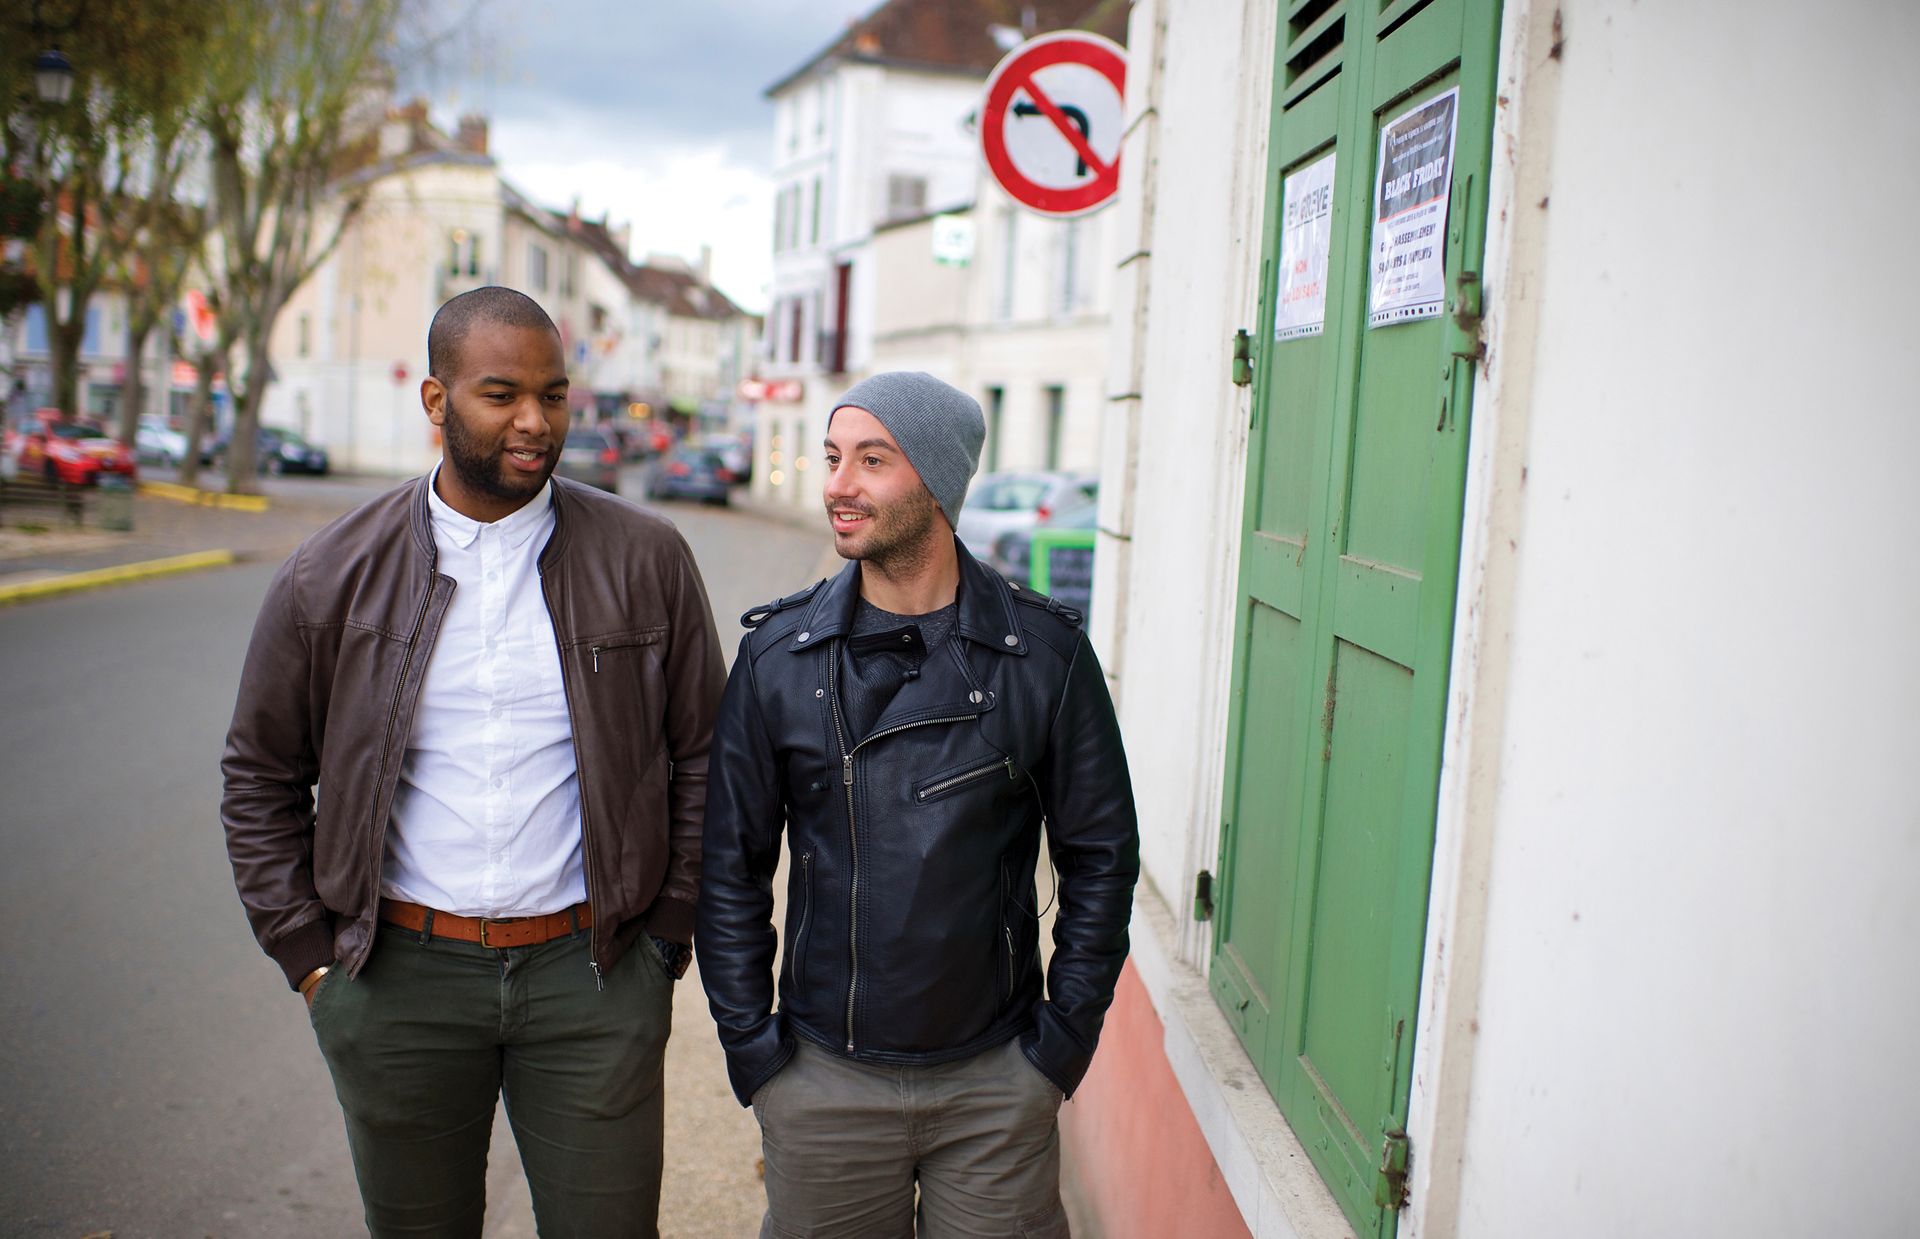 Cayo Sopi (left) and Anthony Linat (right) walk through their neighborhood in the suburbs of Paris, France. They have been friends since childhood.